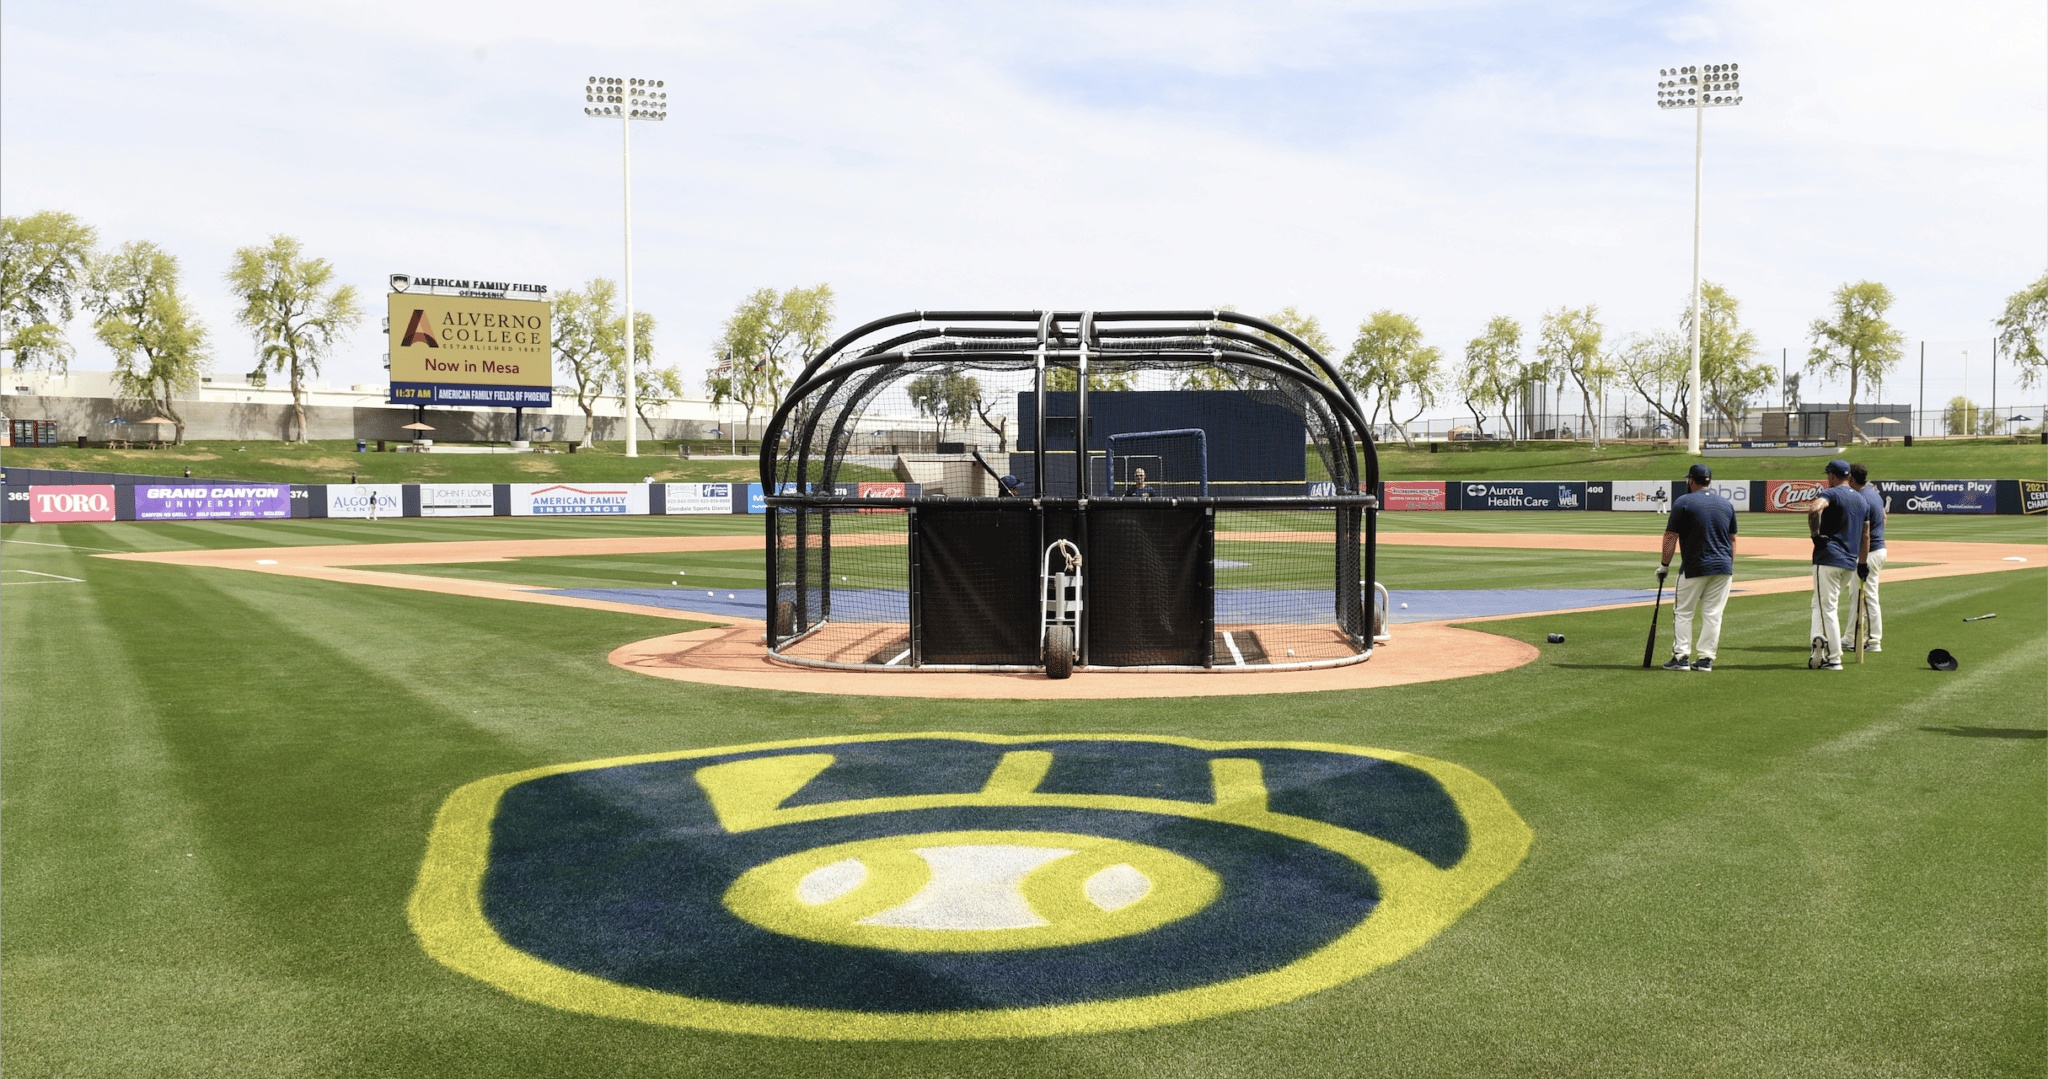 Photos: Mariners take on Royals in spring training matchup